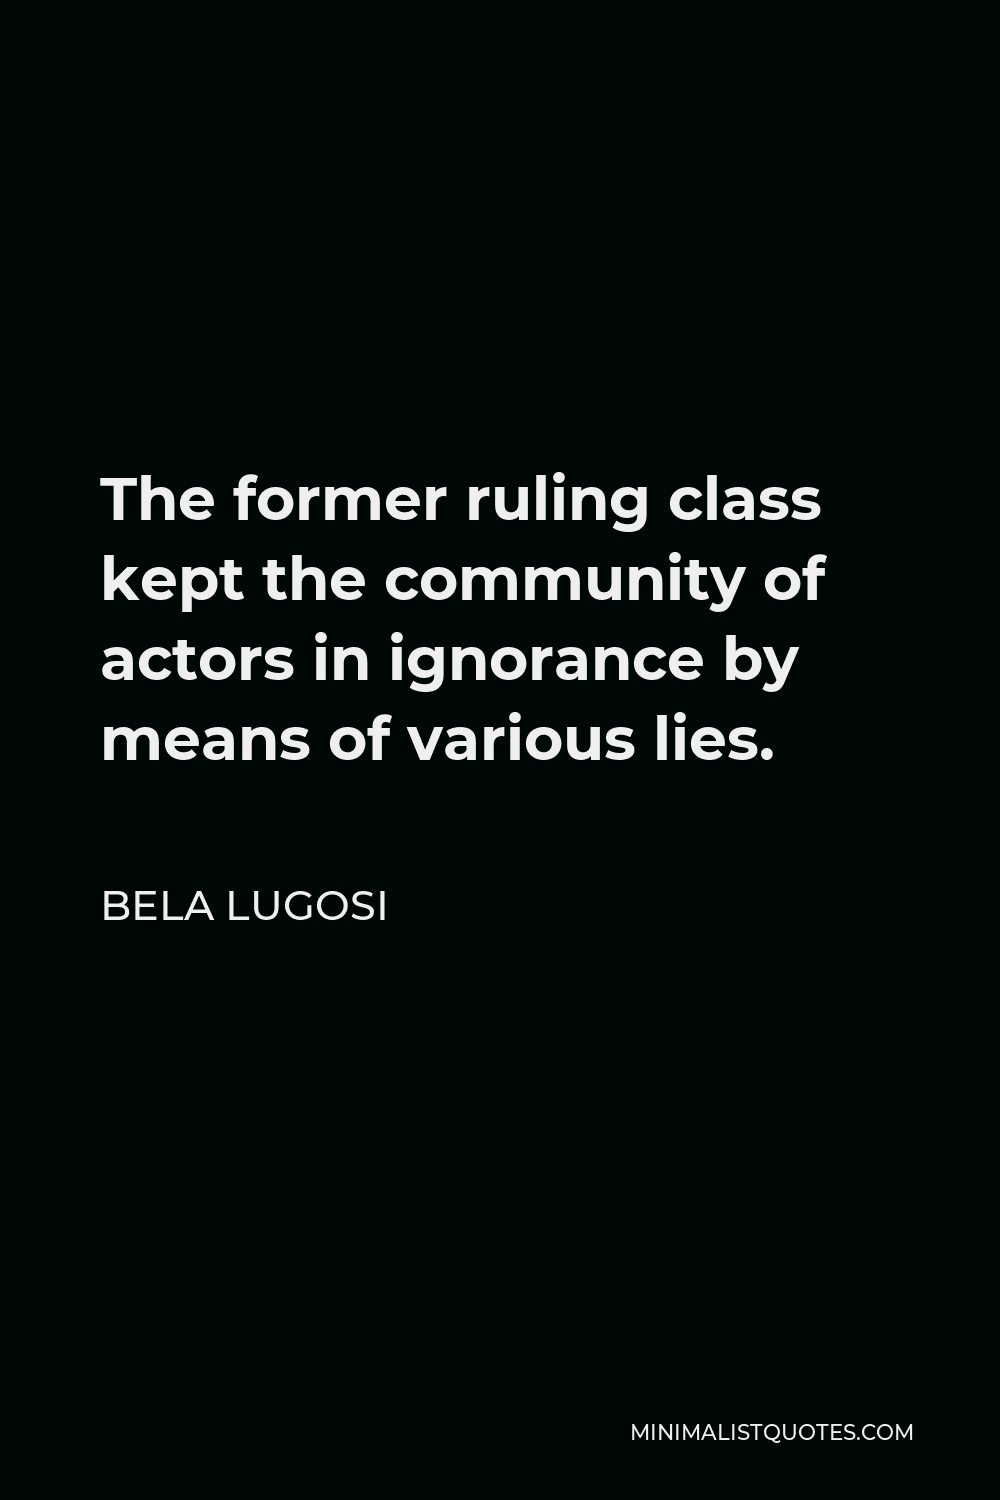 Bela Lugosi Quote - The former ruling class kept the community of actors in ignorance by means of various lies.